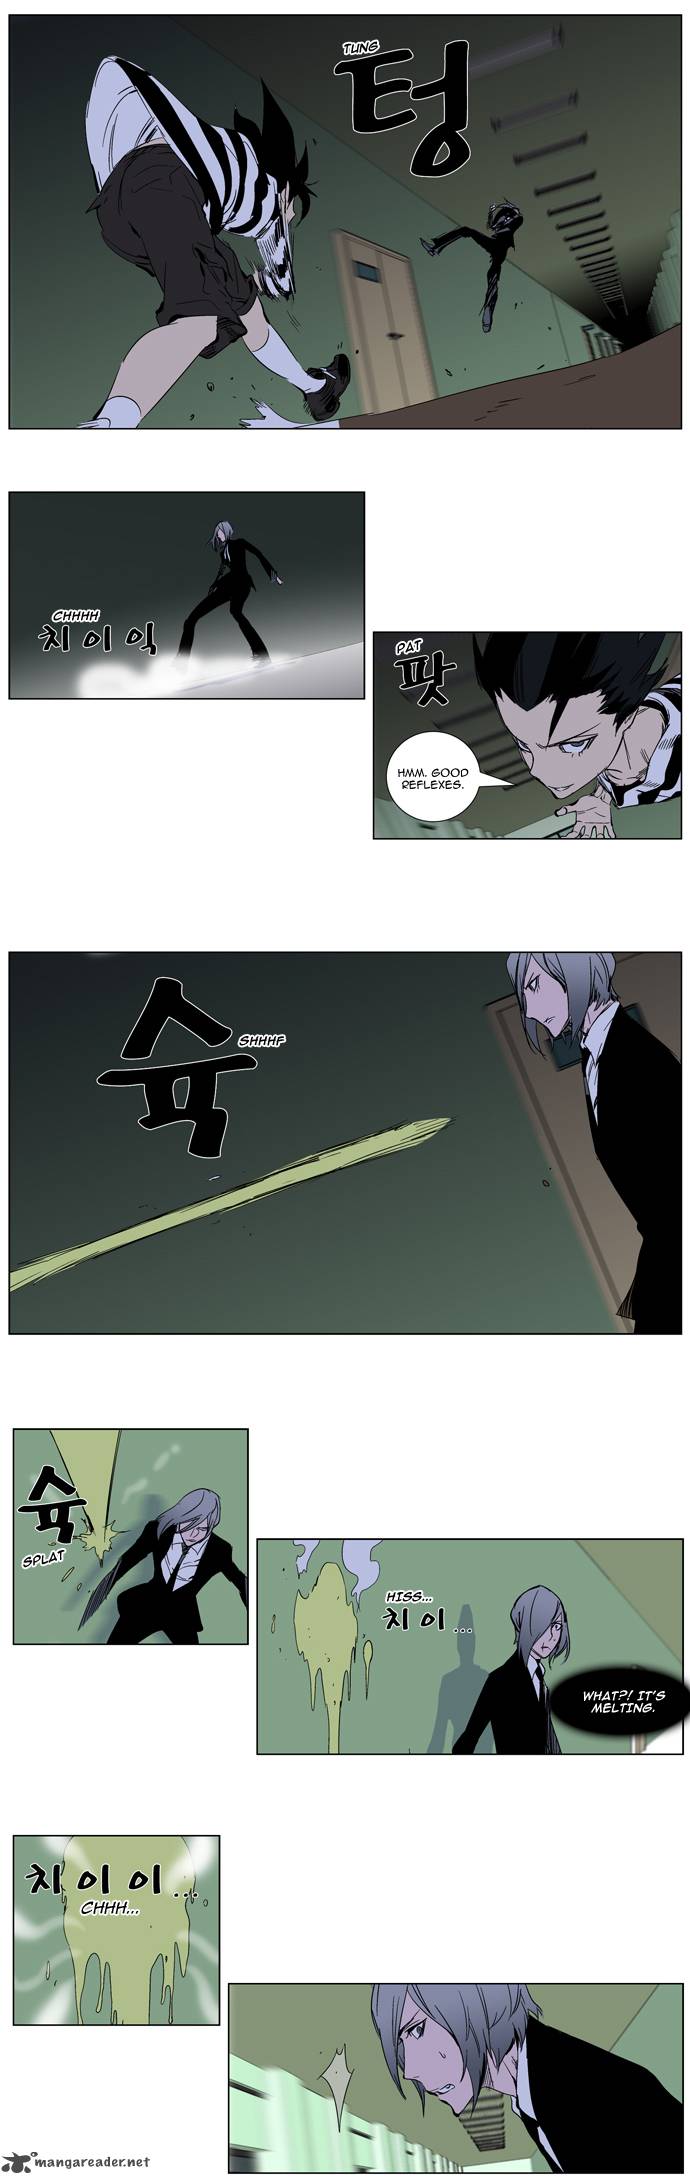 Noblesse 271 3